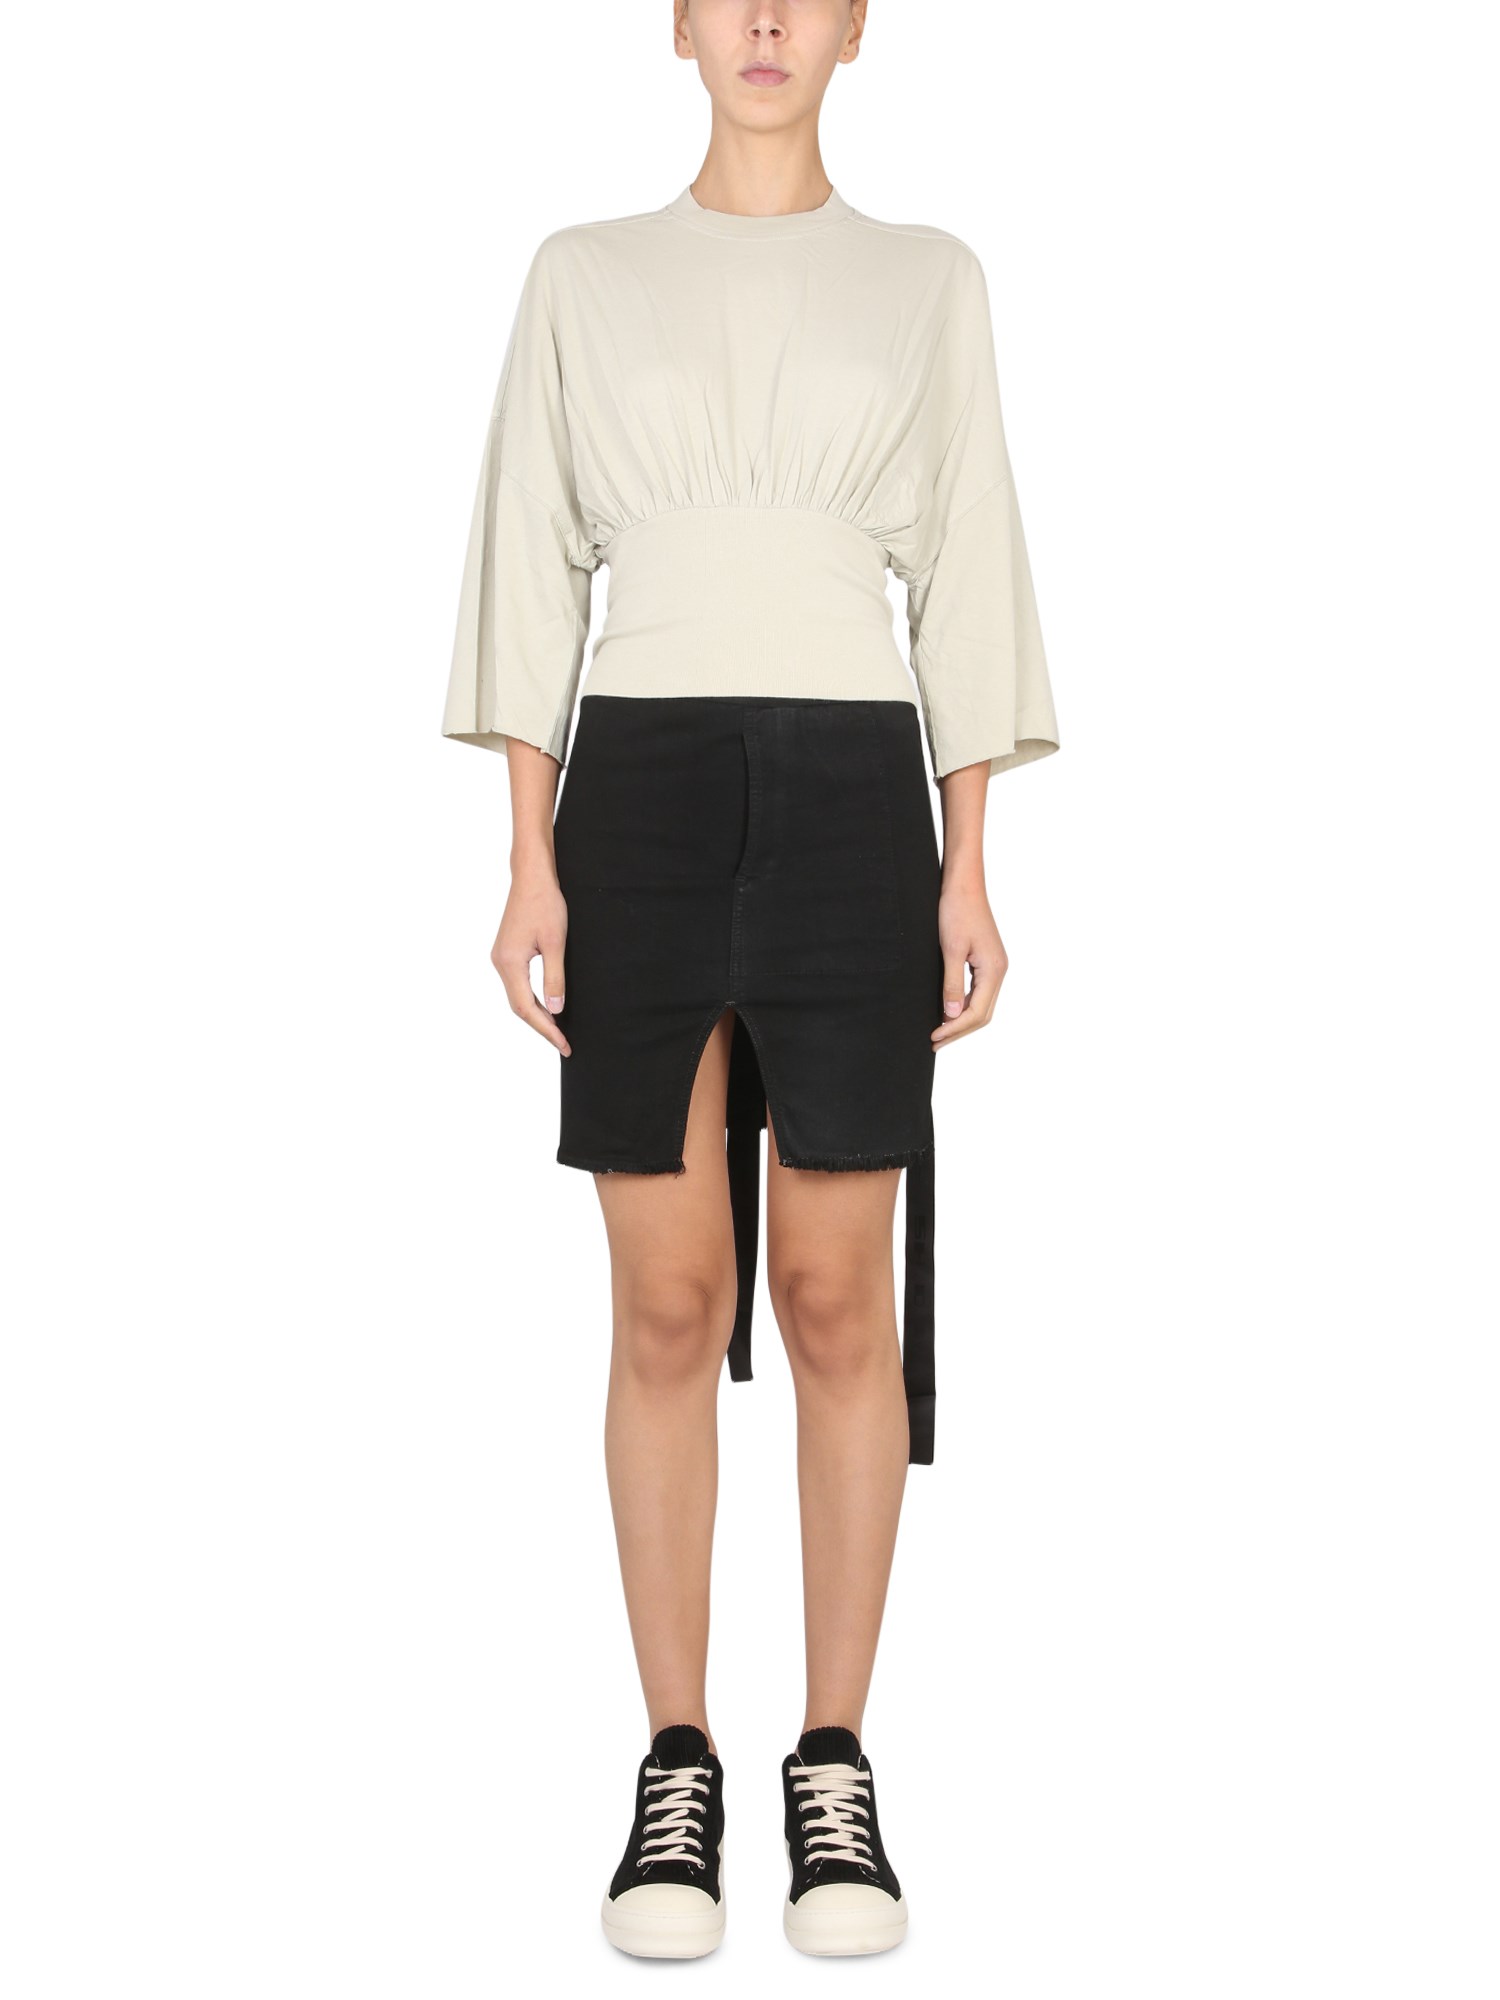 rick owens drkshdw tommy cropped top